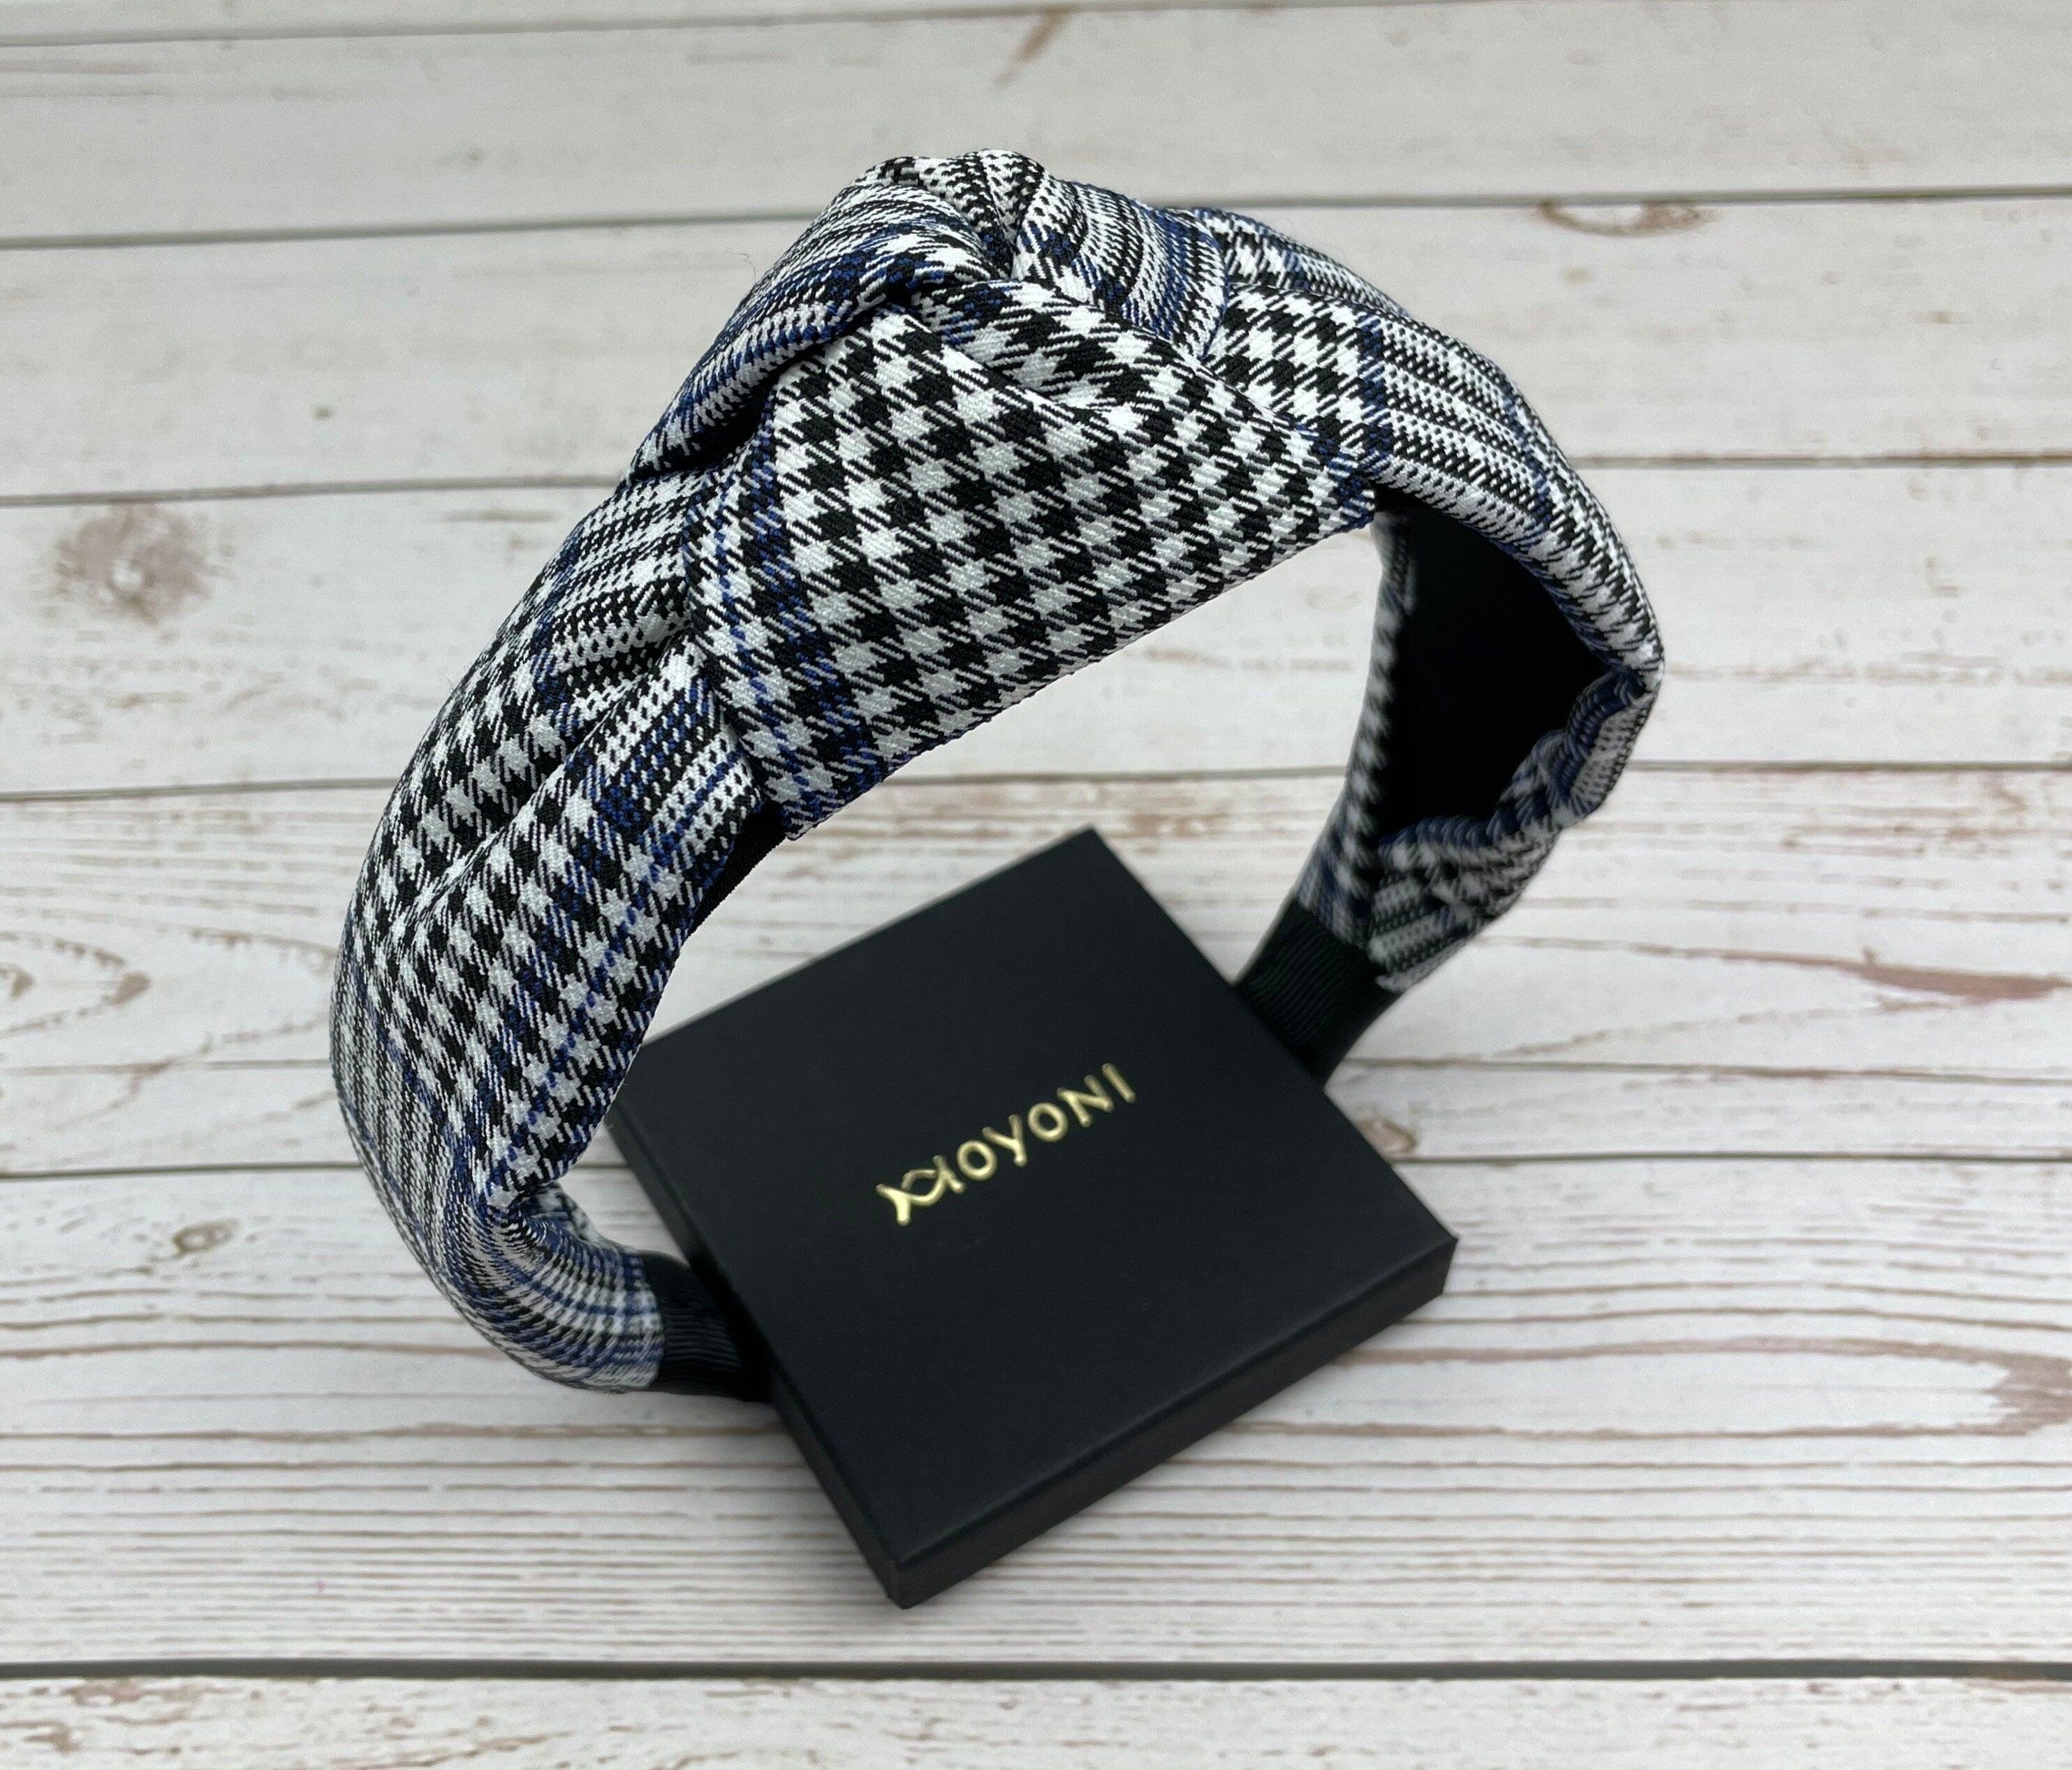 Premium Classic Knotted Headband in Crepe White and Black with Dark Blue Stripes - Fashionable Hair Accessory for Women, Perfect for College available at Moyoni Design